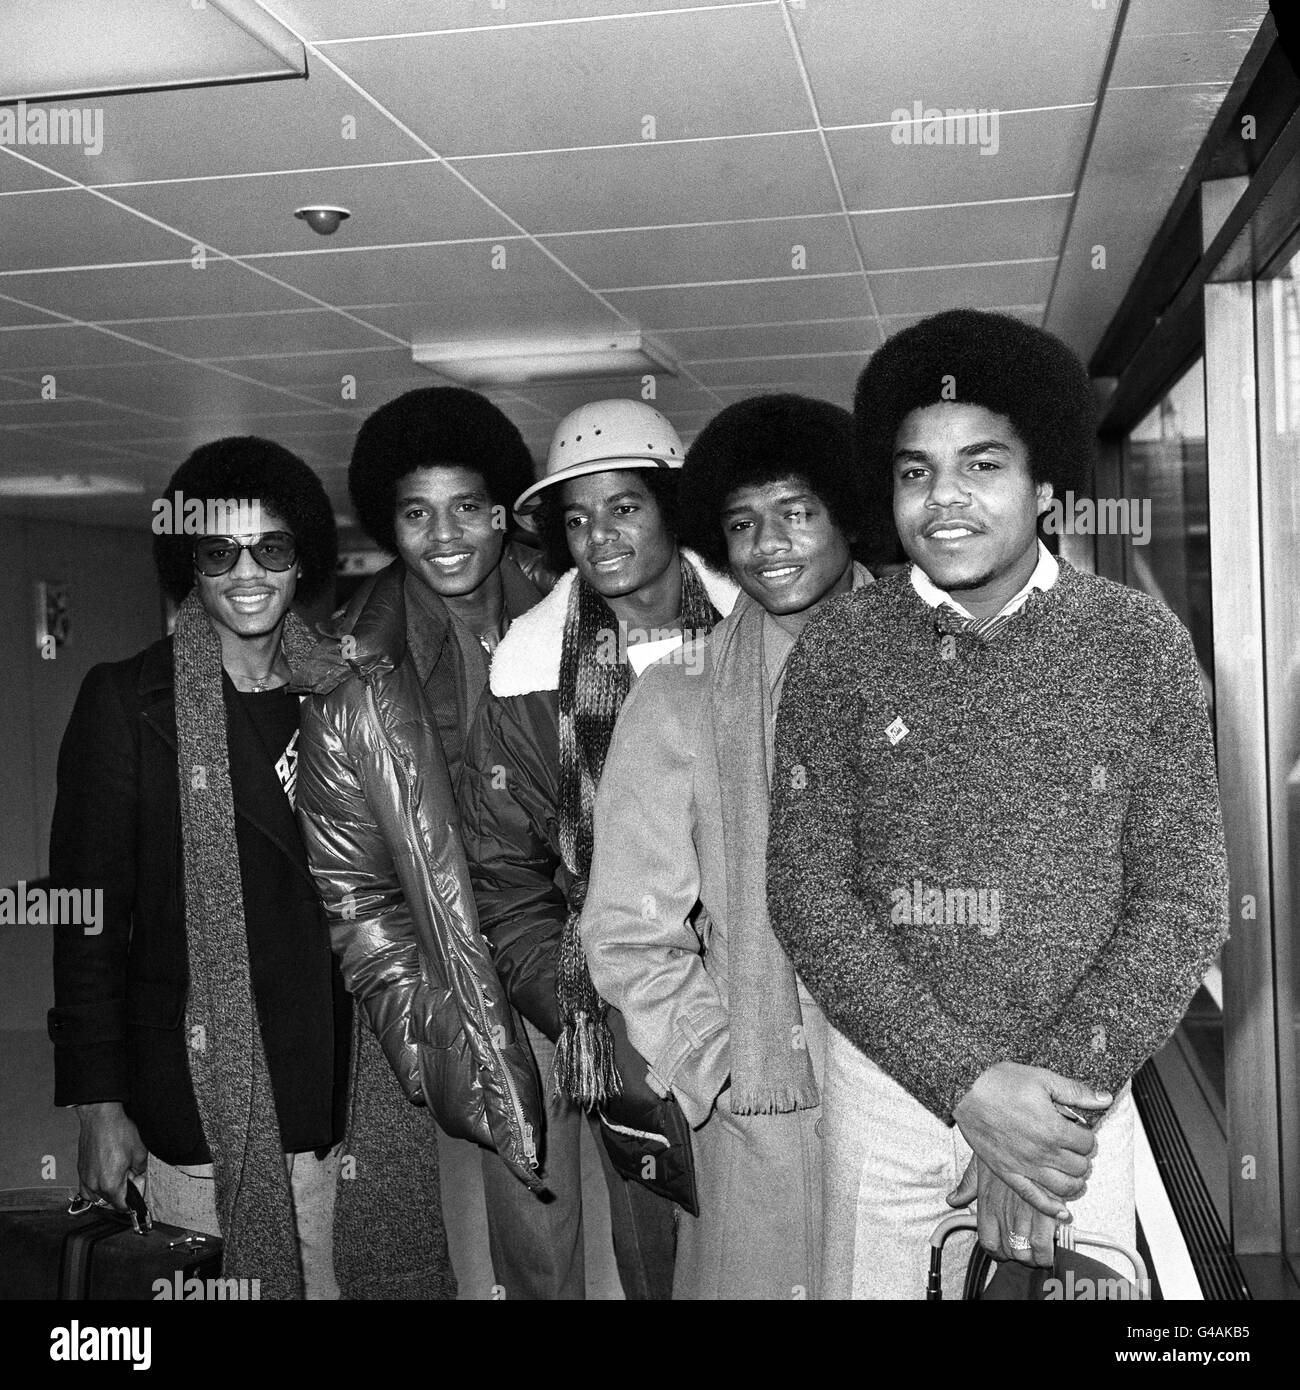 Michael Jackson (centre) with his brothers L-R: Marlon, Jackie, Randy and Tito 'The Jackson Five' at Heathorw Airport, London arriving from Amsterdam for their British tour. Stock Photo